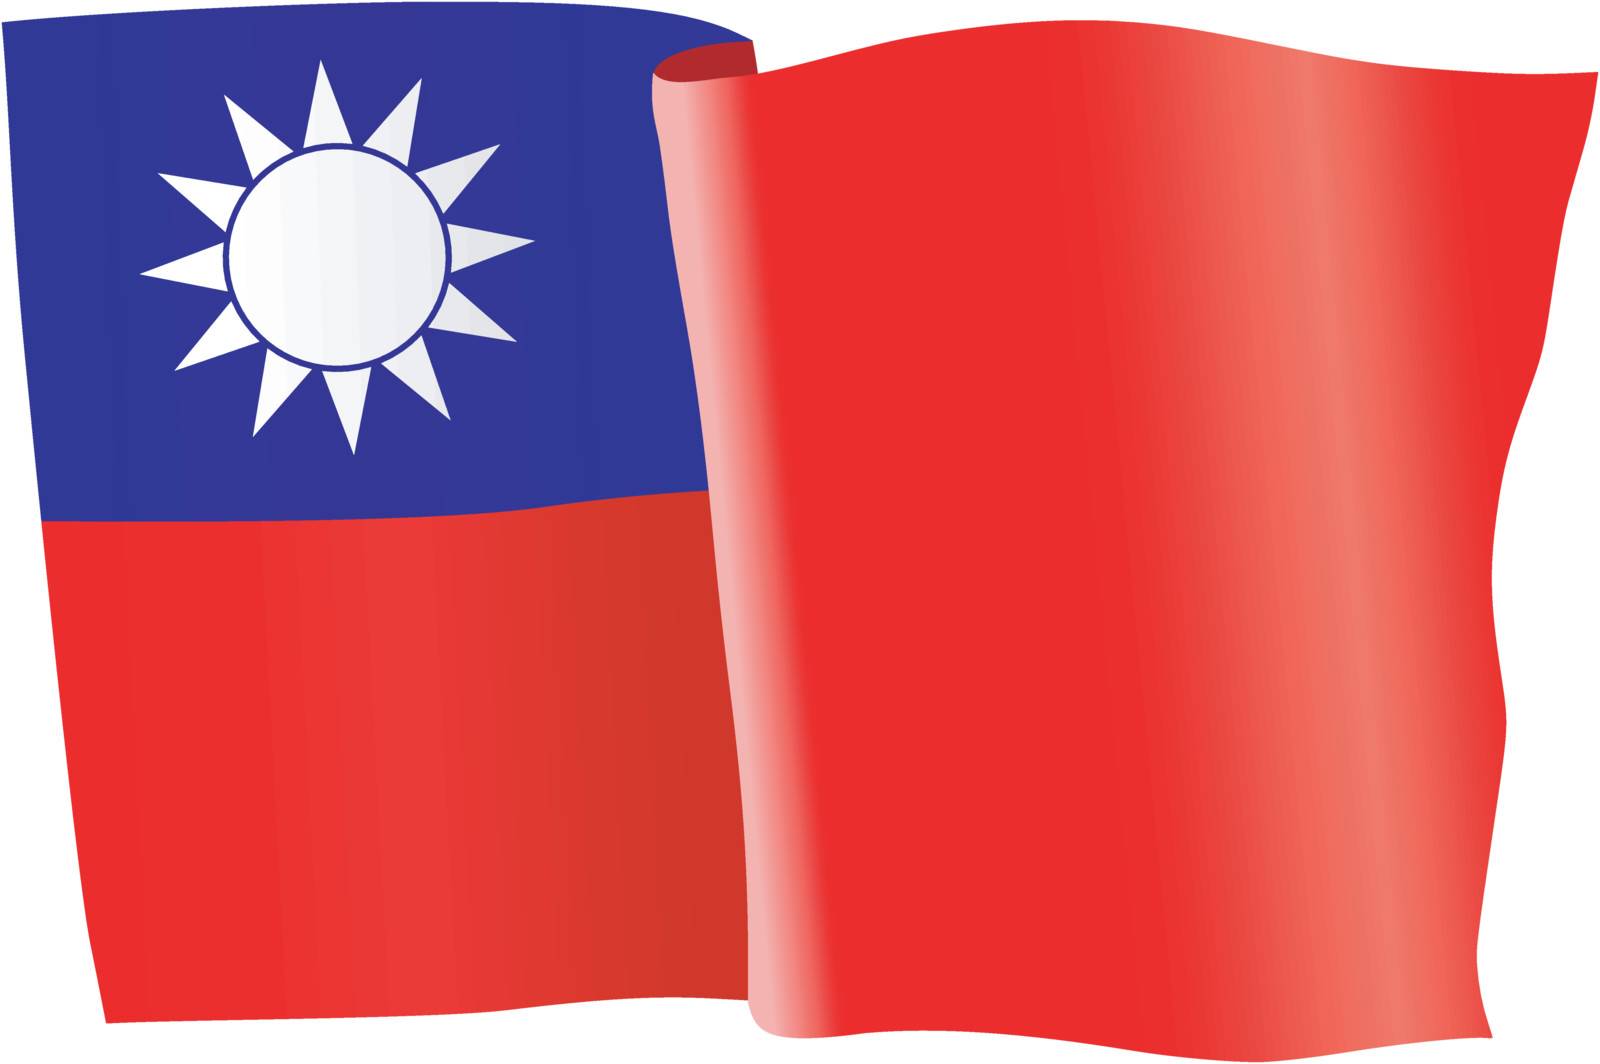 flag of Taiwan by Perysty